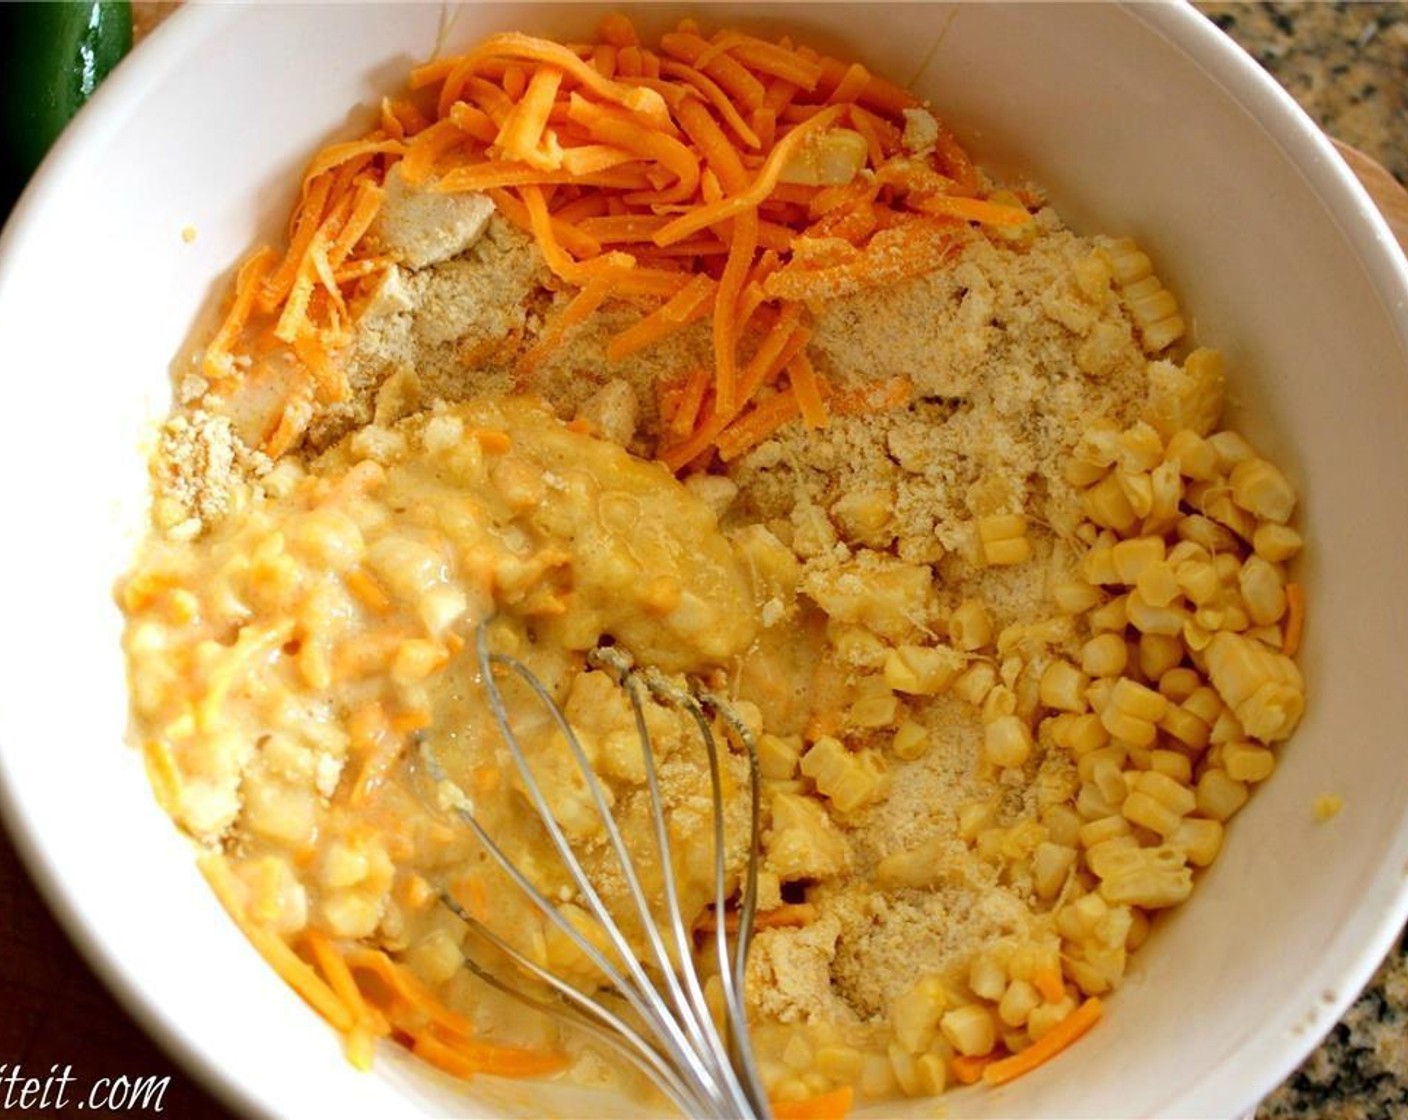 step 3 In a medium bowl, mix the Cornbread Mix (1 box) according to the box instructions, then add in Canned Corn (1 cup) and Shredded Cheddar Cheese (1 1/2 cups).